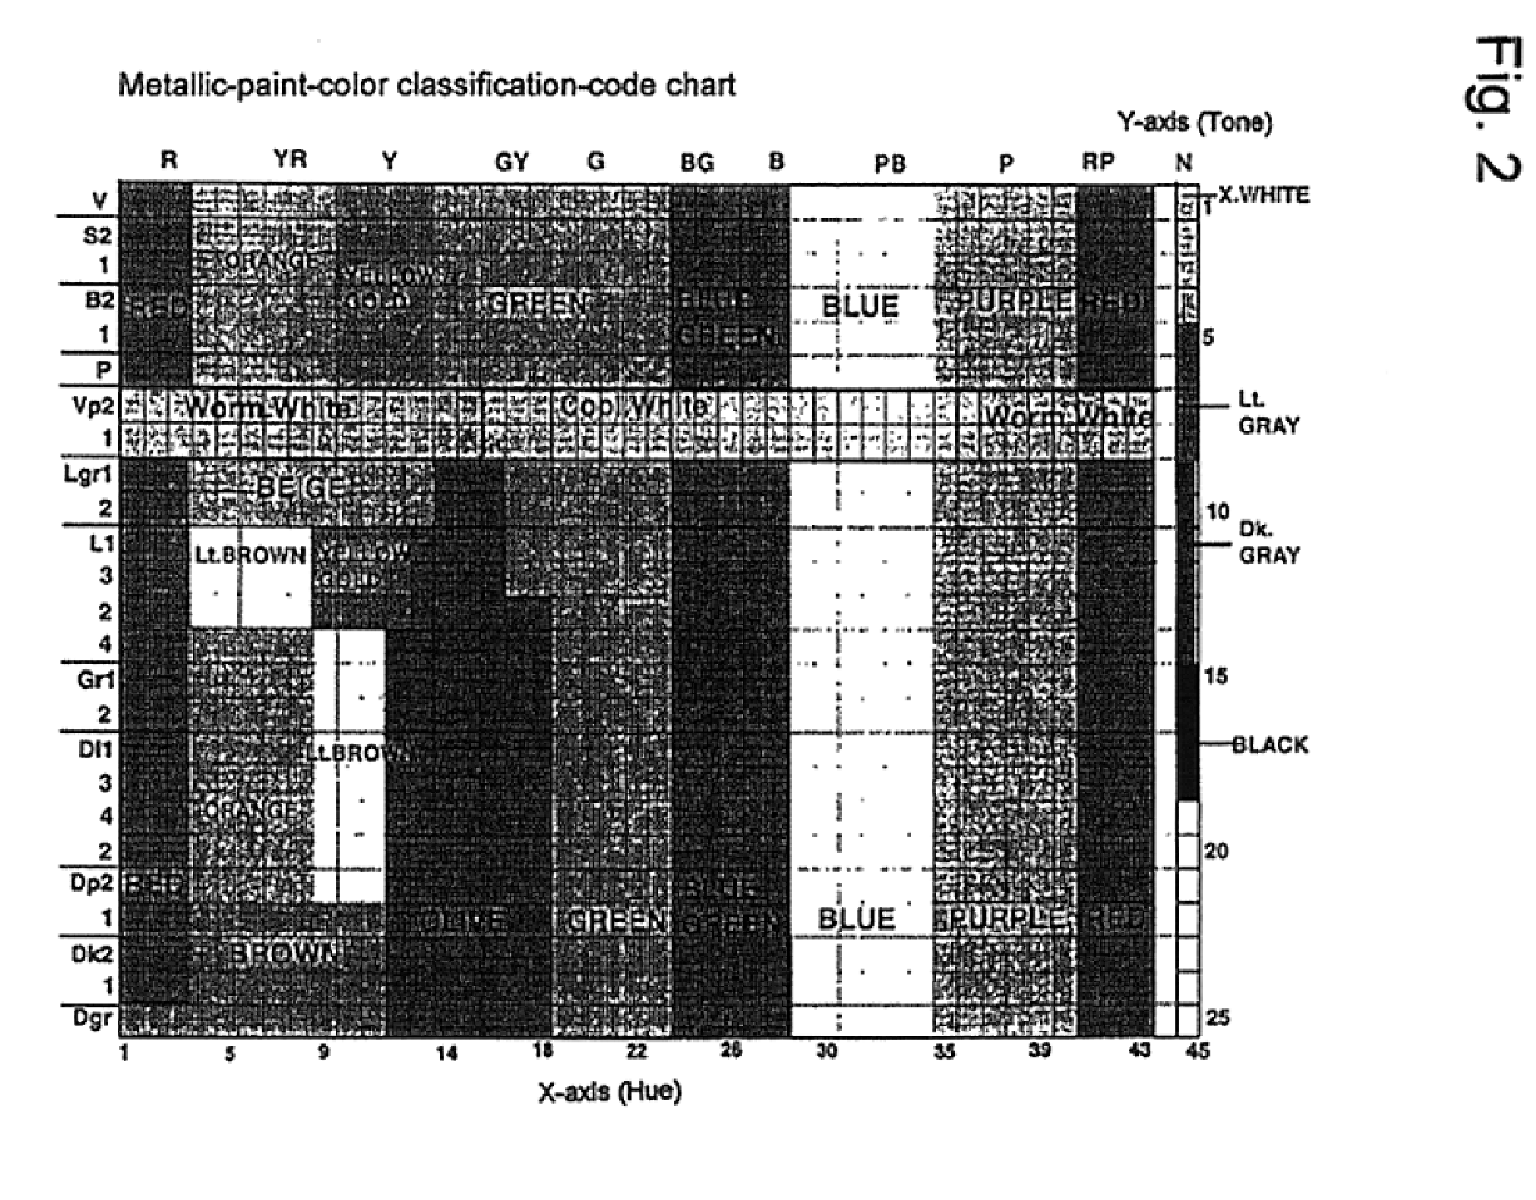 Method for quickly retrieving approximate color of metallic paint color